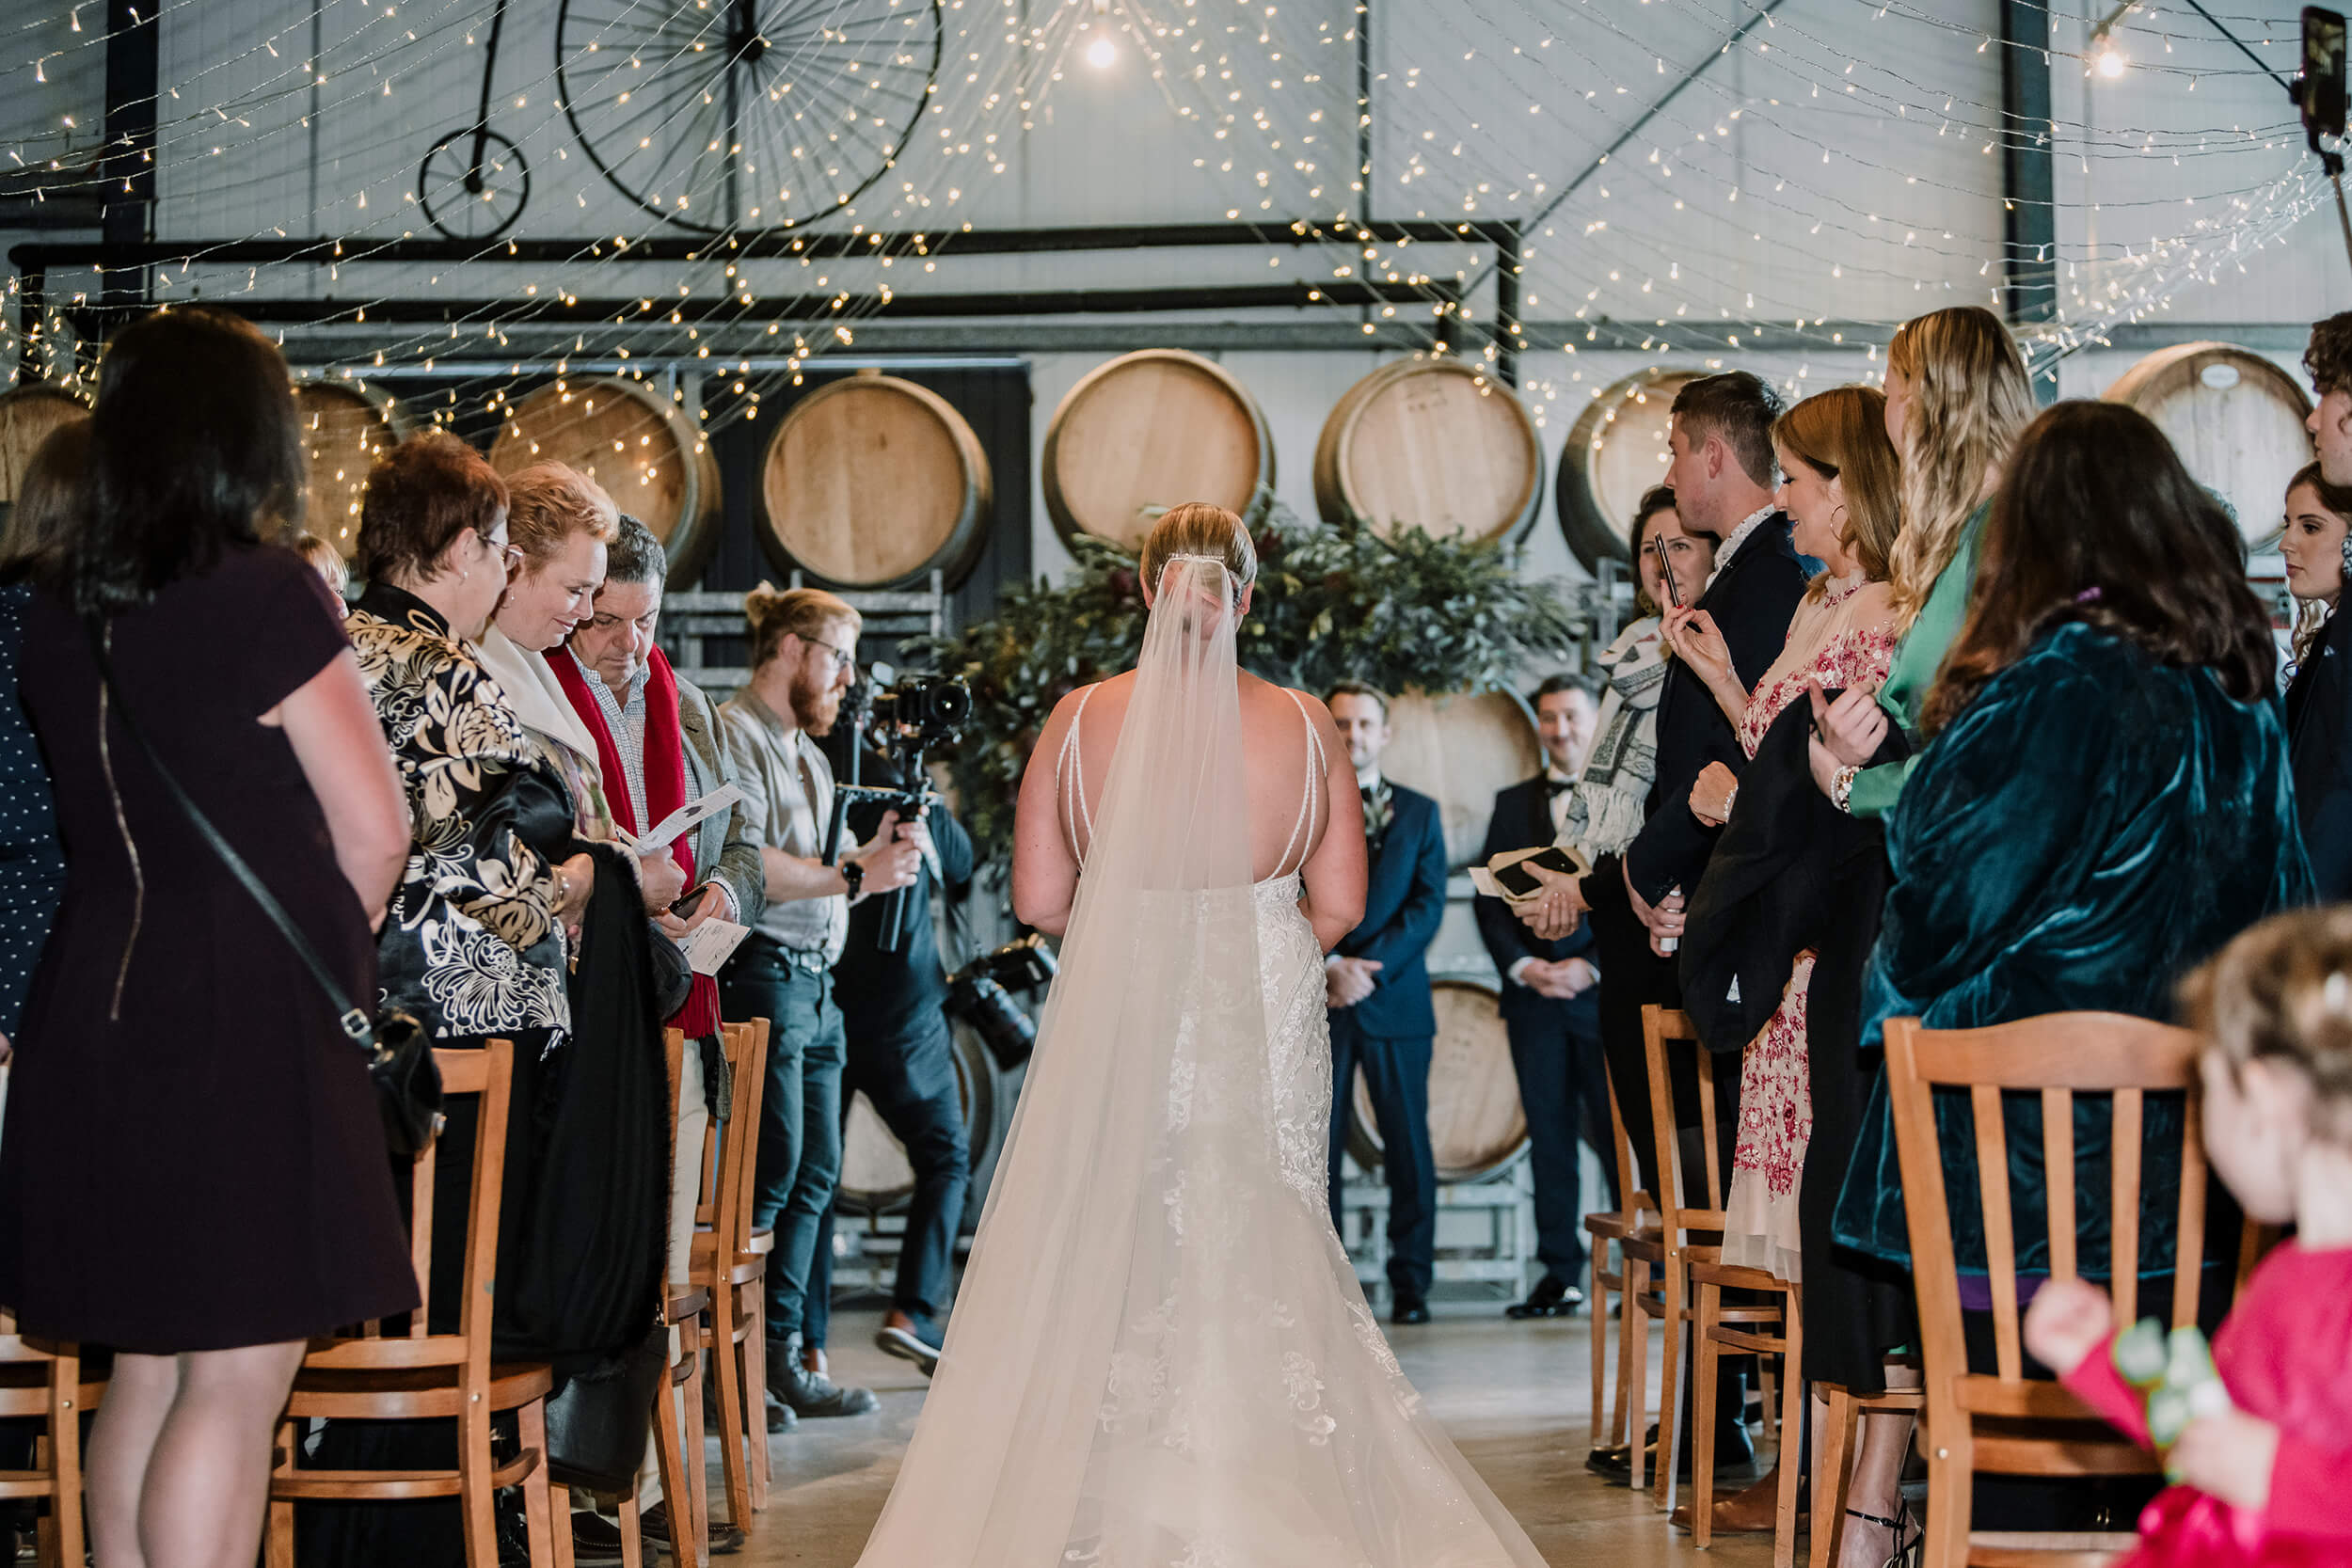 Beautiful bride walking down the aisle in this beautiful winery venue. Captured by Black Avenue Productions